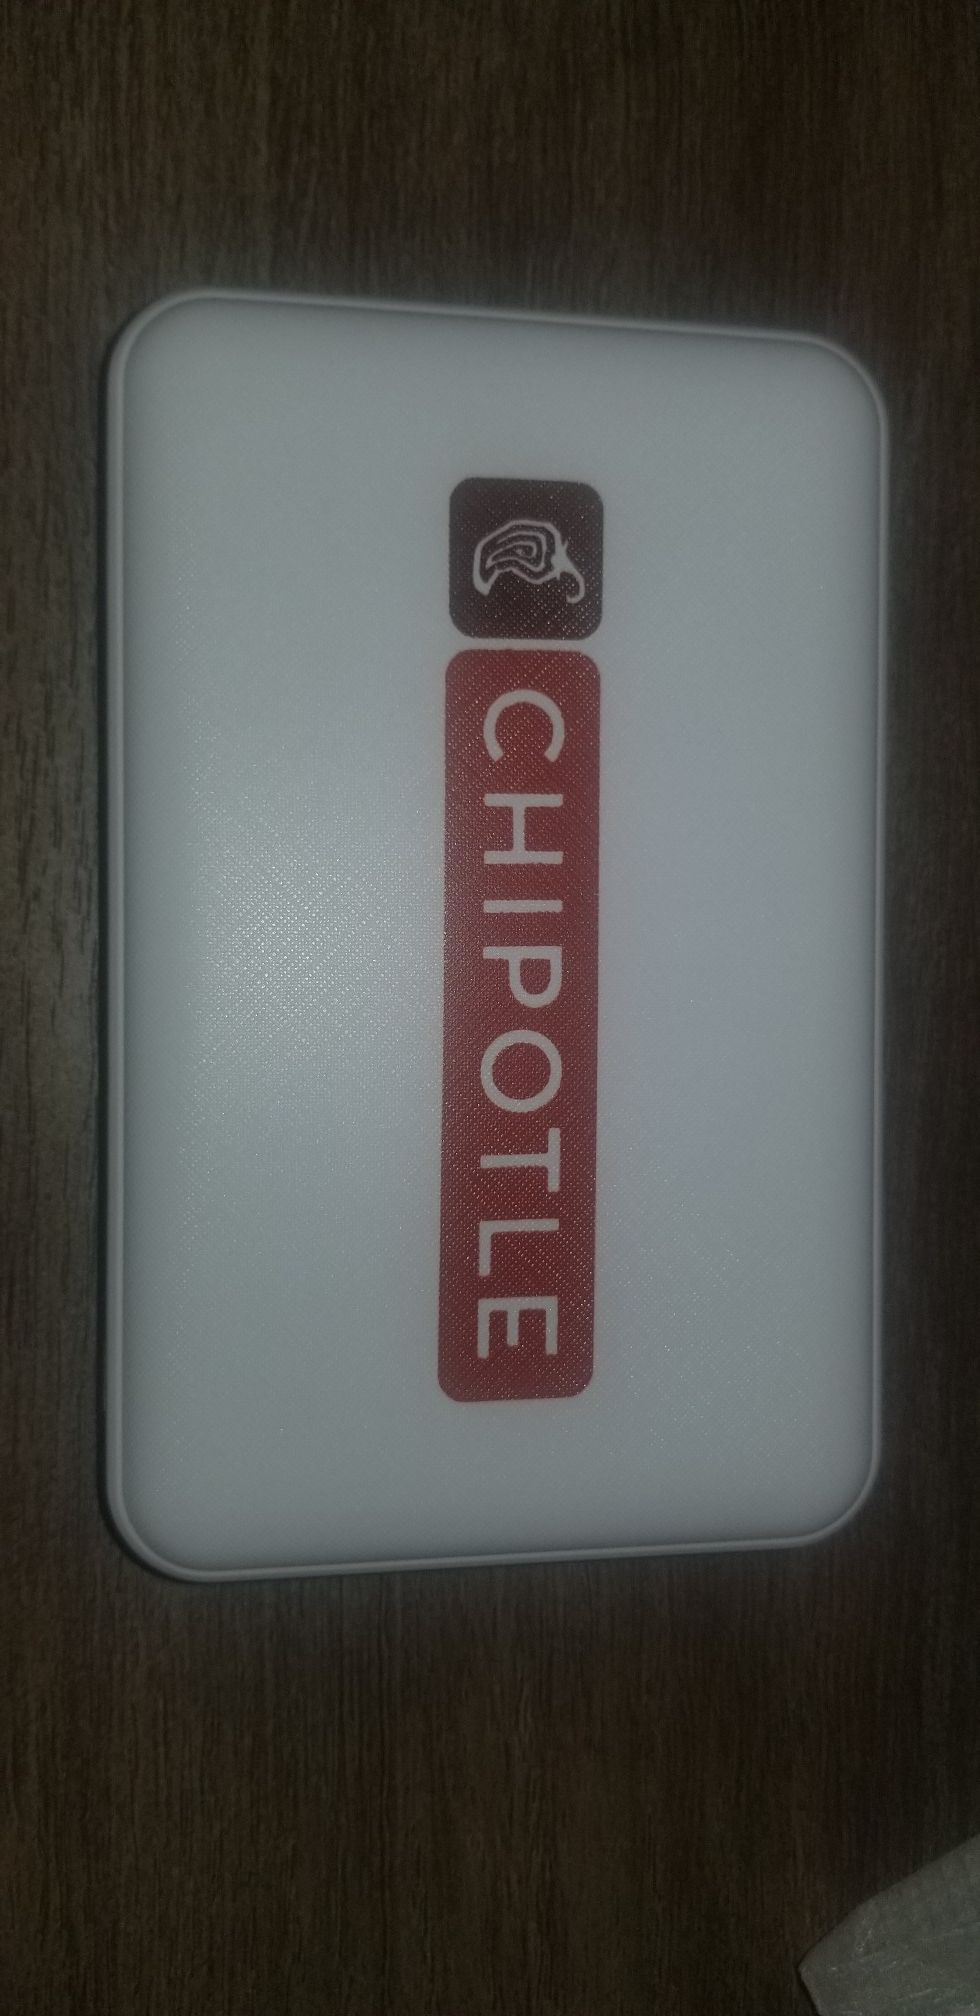 Chipotle Portable Charger Brand New never Used